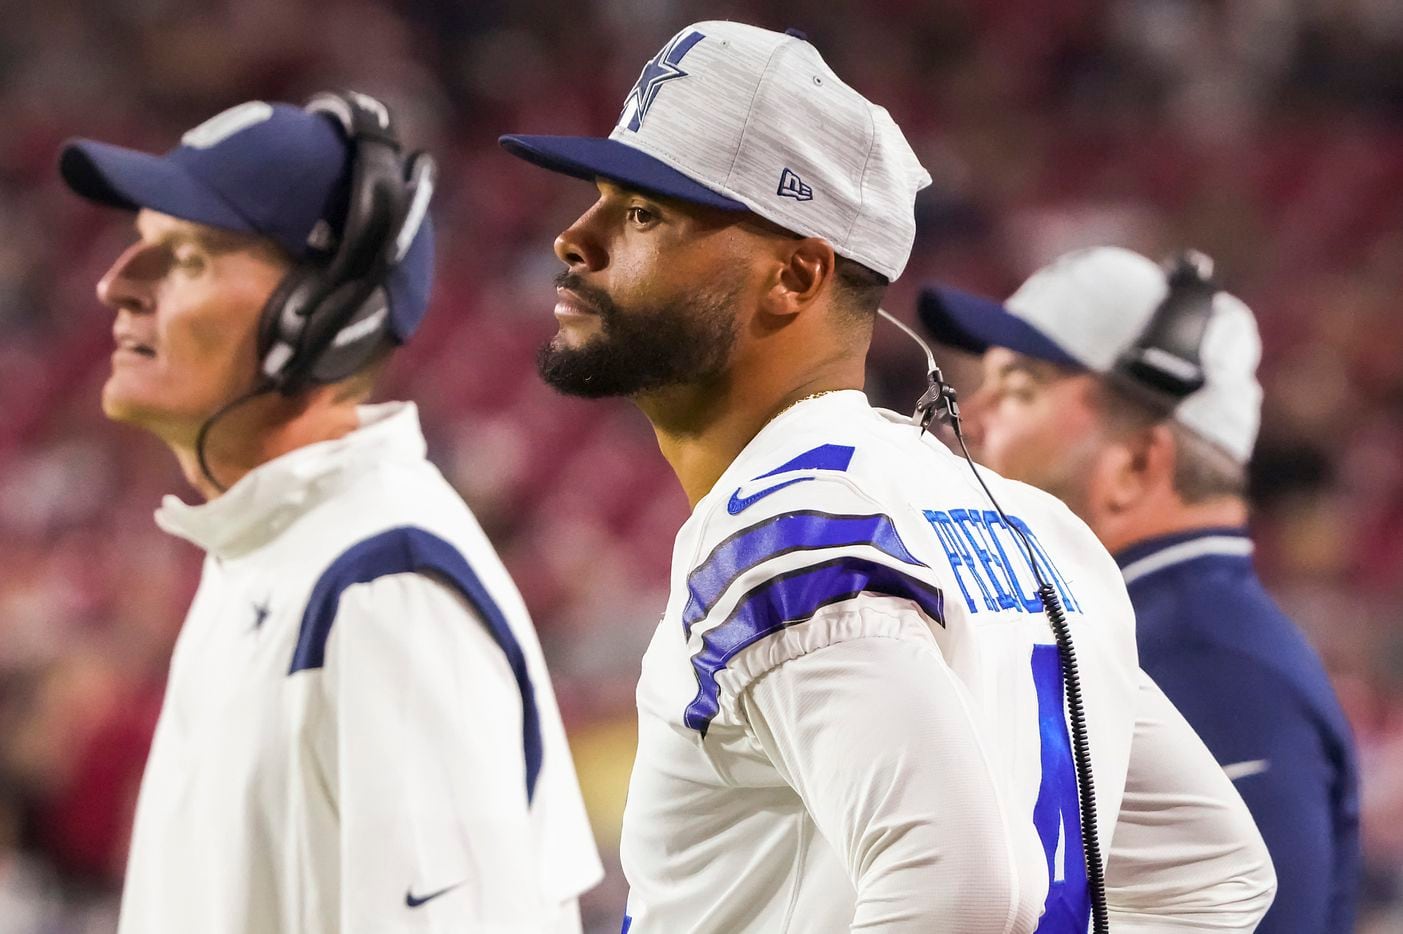 Dallas Cowboys quarterback Dak Prescott watches from the sidelines during the first quarter of an NFL football game against the Arizona Cardinals at State Farm Stadium on Friday, Aug. 13, 2021, in Glendale, Ariz.